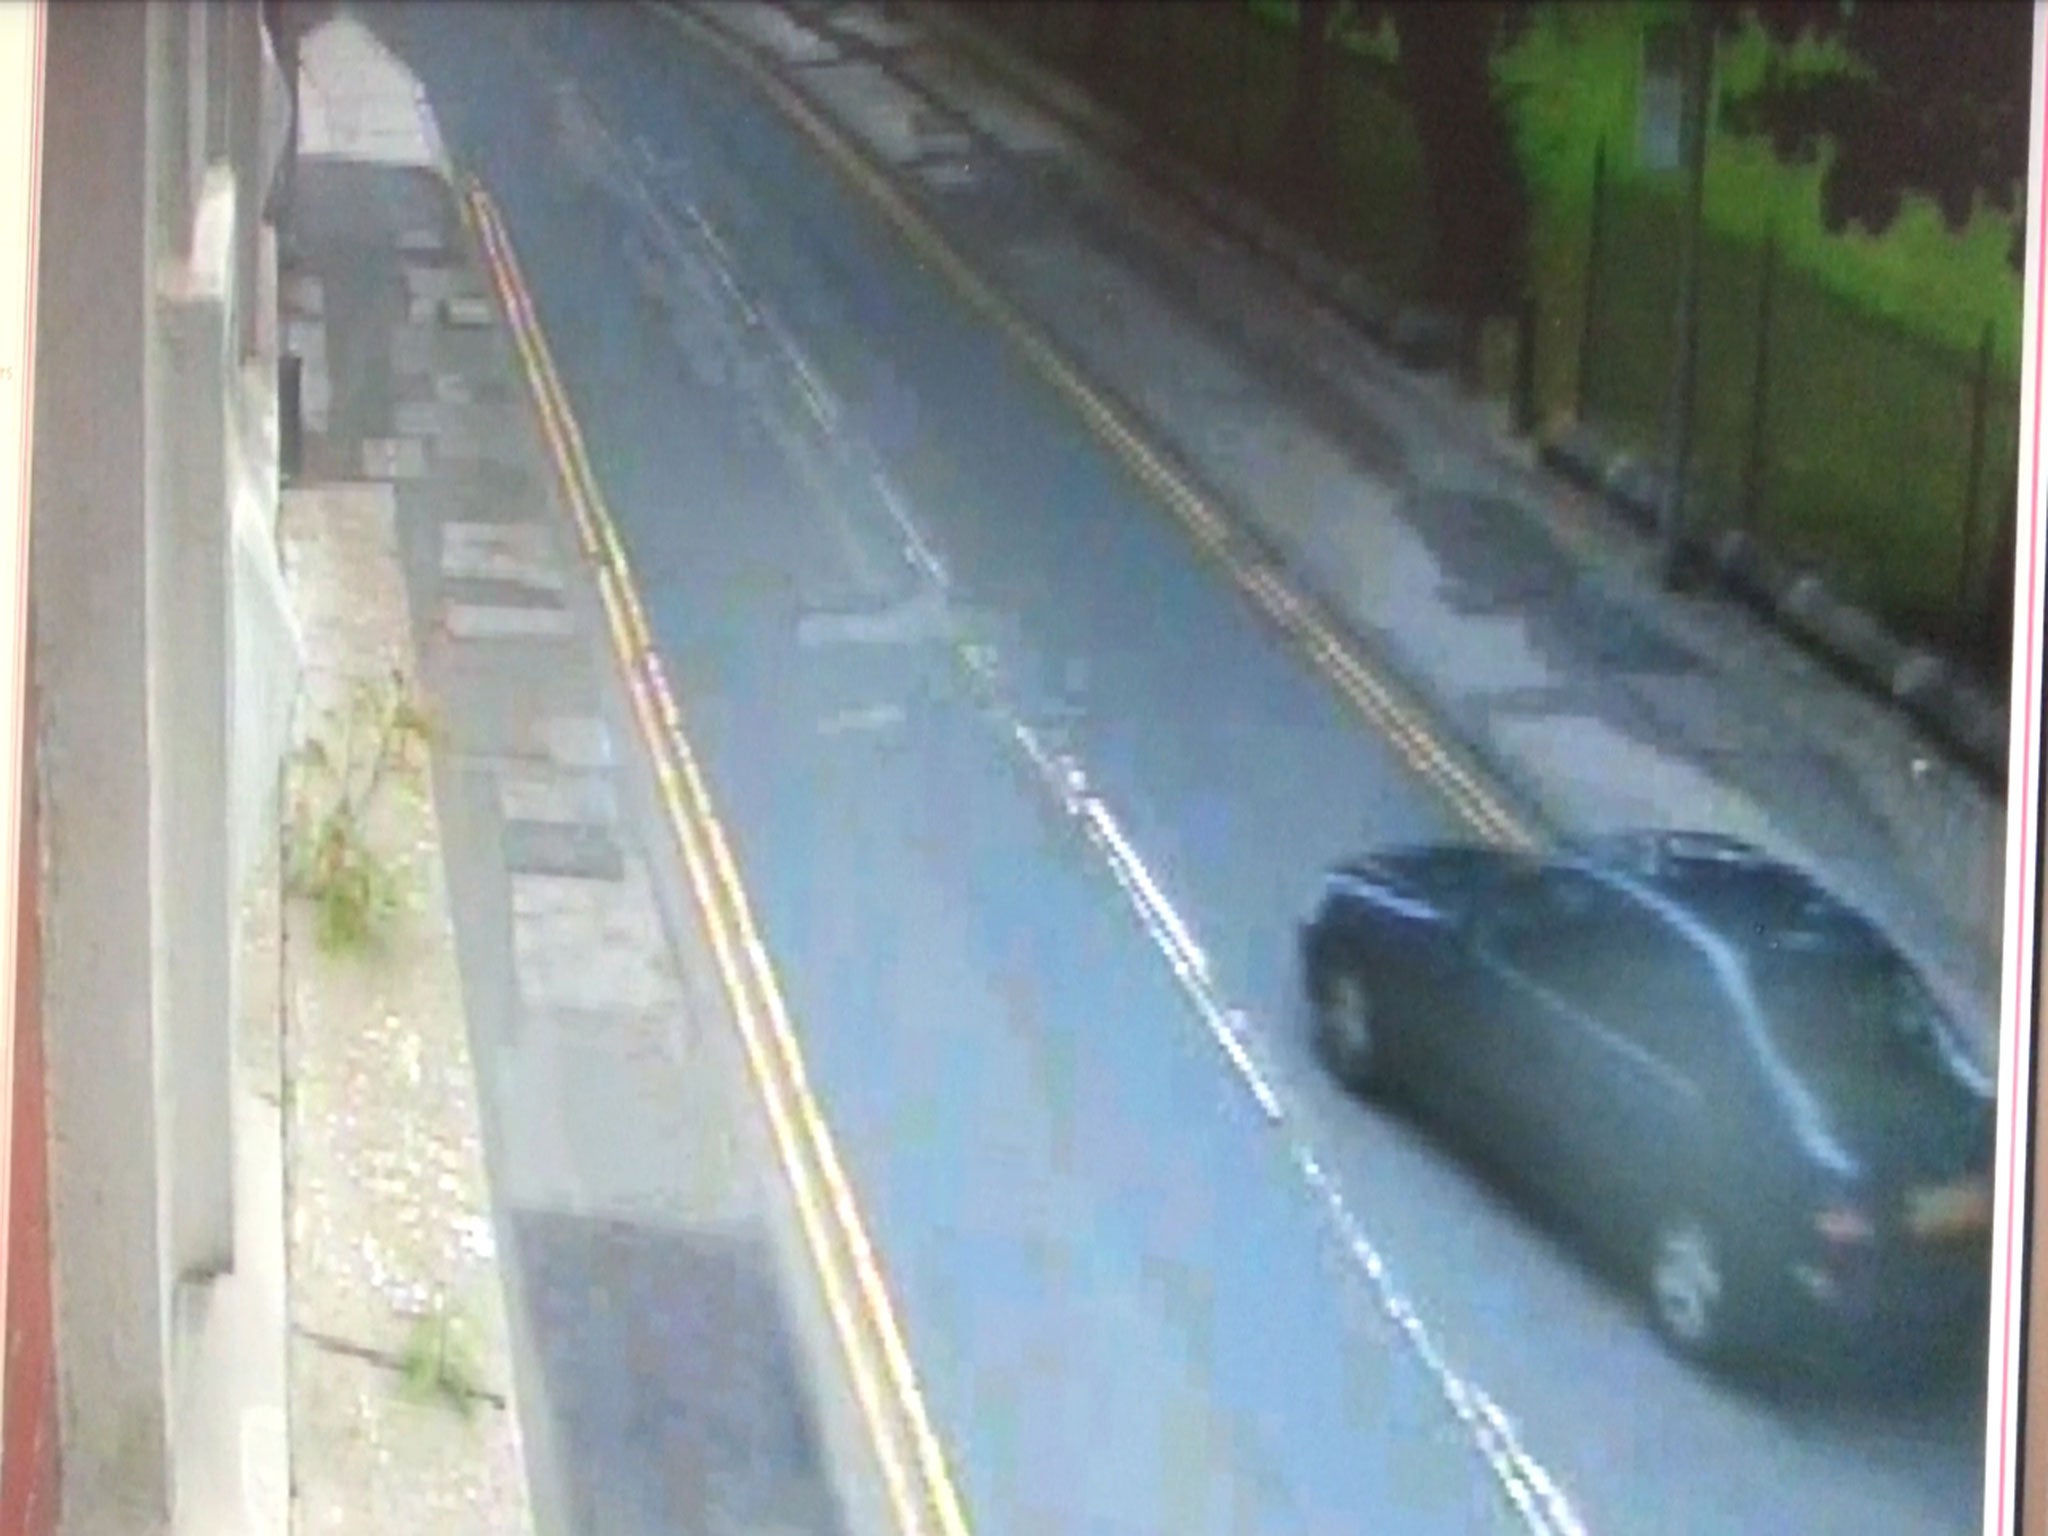 The woman is shown on CCTV being bundled into Blue Honda Civic